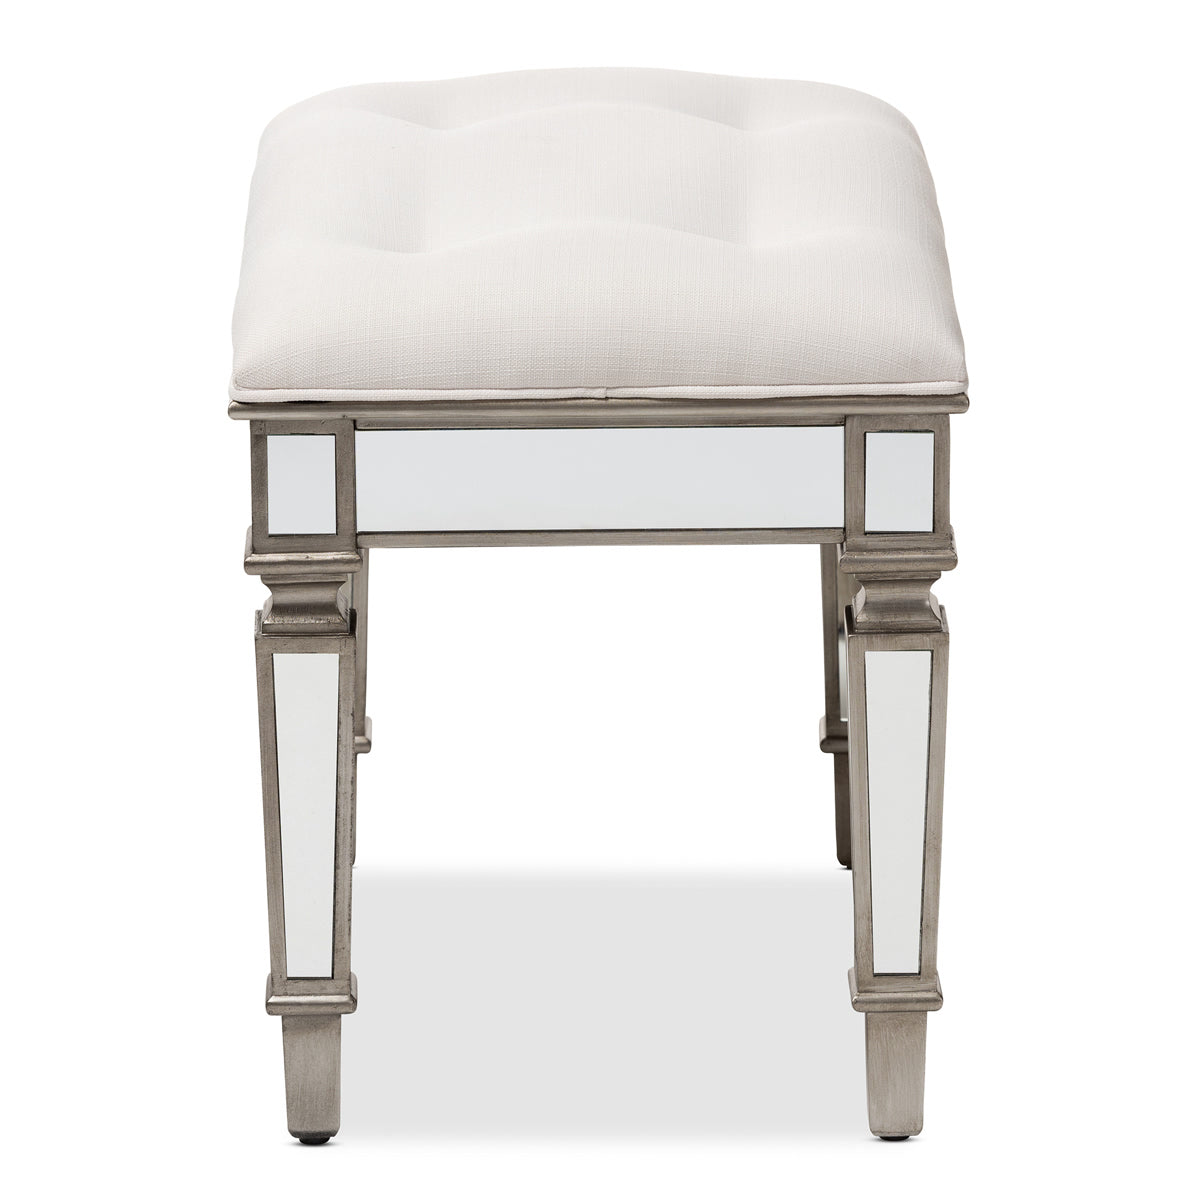 Baxton Studio Marielle Hollywood Regency Glamour Style Off White Fabric Upholstered Mirrored Ottoman Vanity Bench Baxton Studio-ottomans-Minimal And Modern - 3